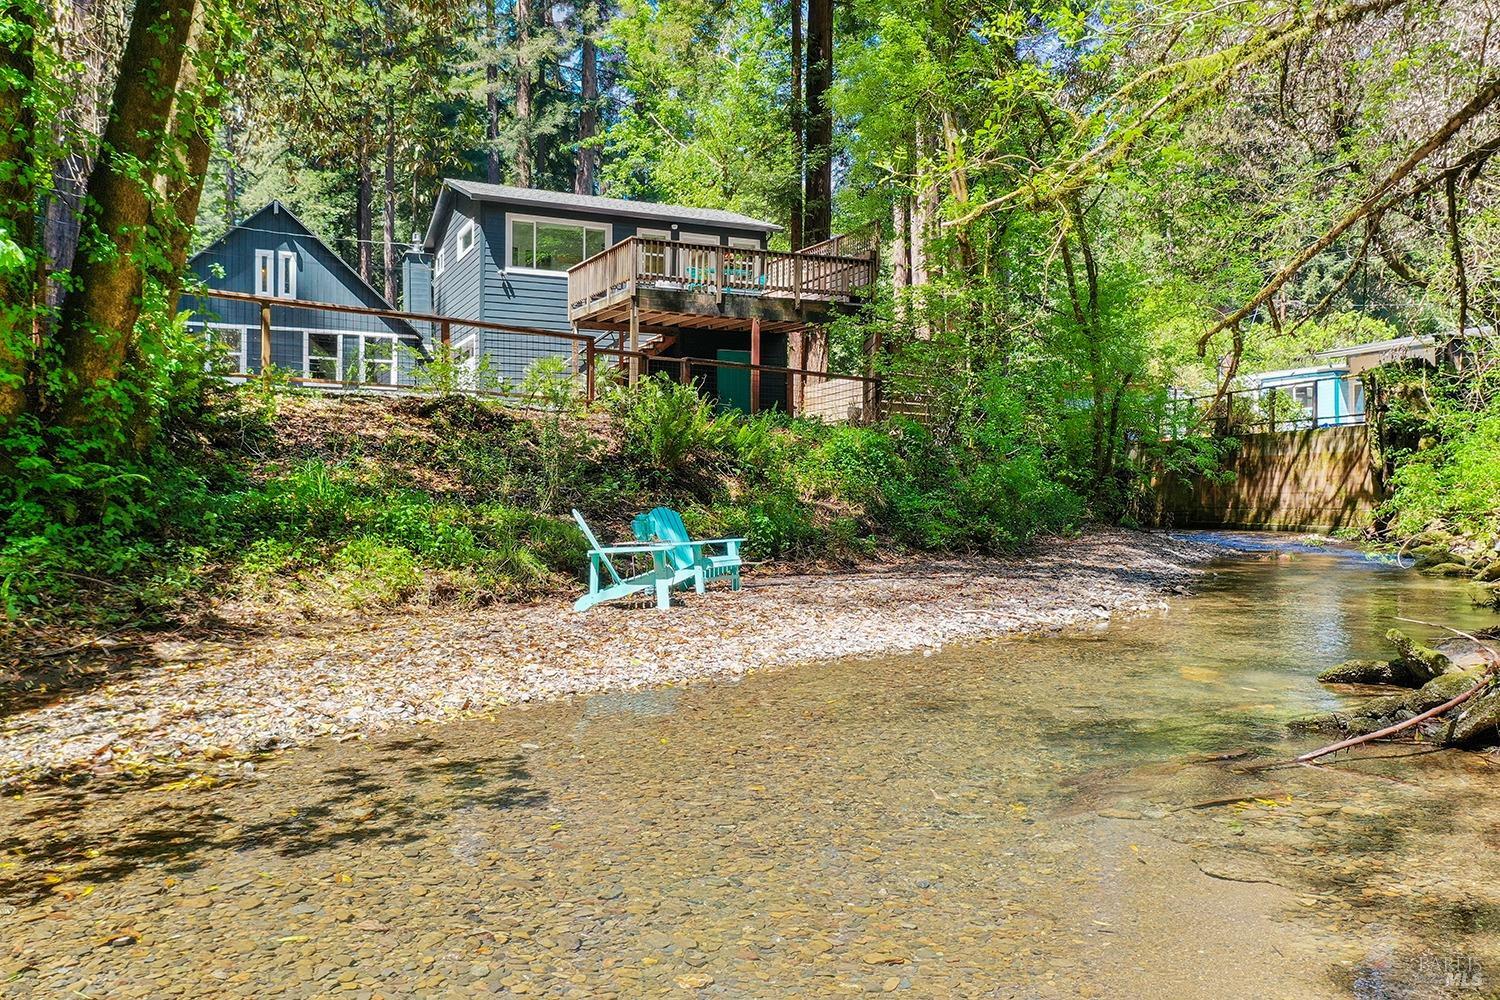 Photo of 15555-15553 Old Cazadero Rd in Guerneville, CA